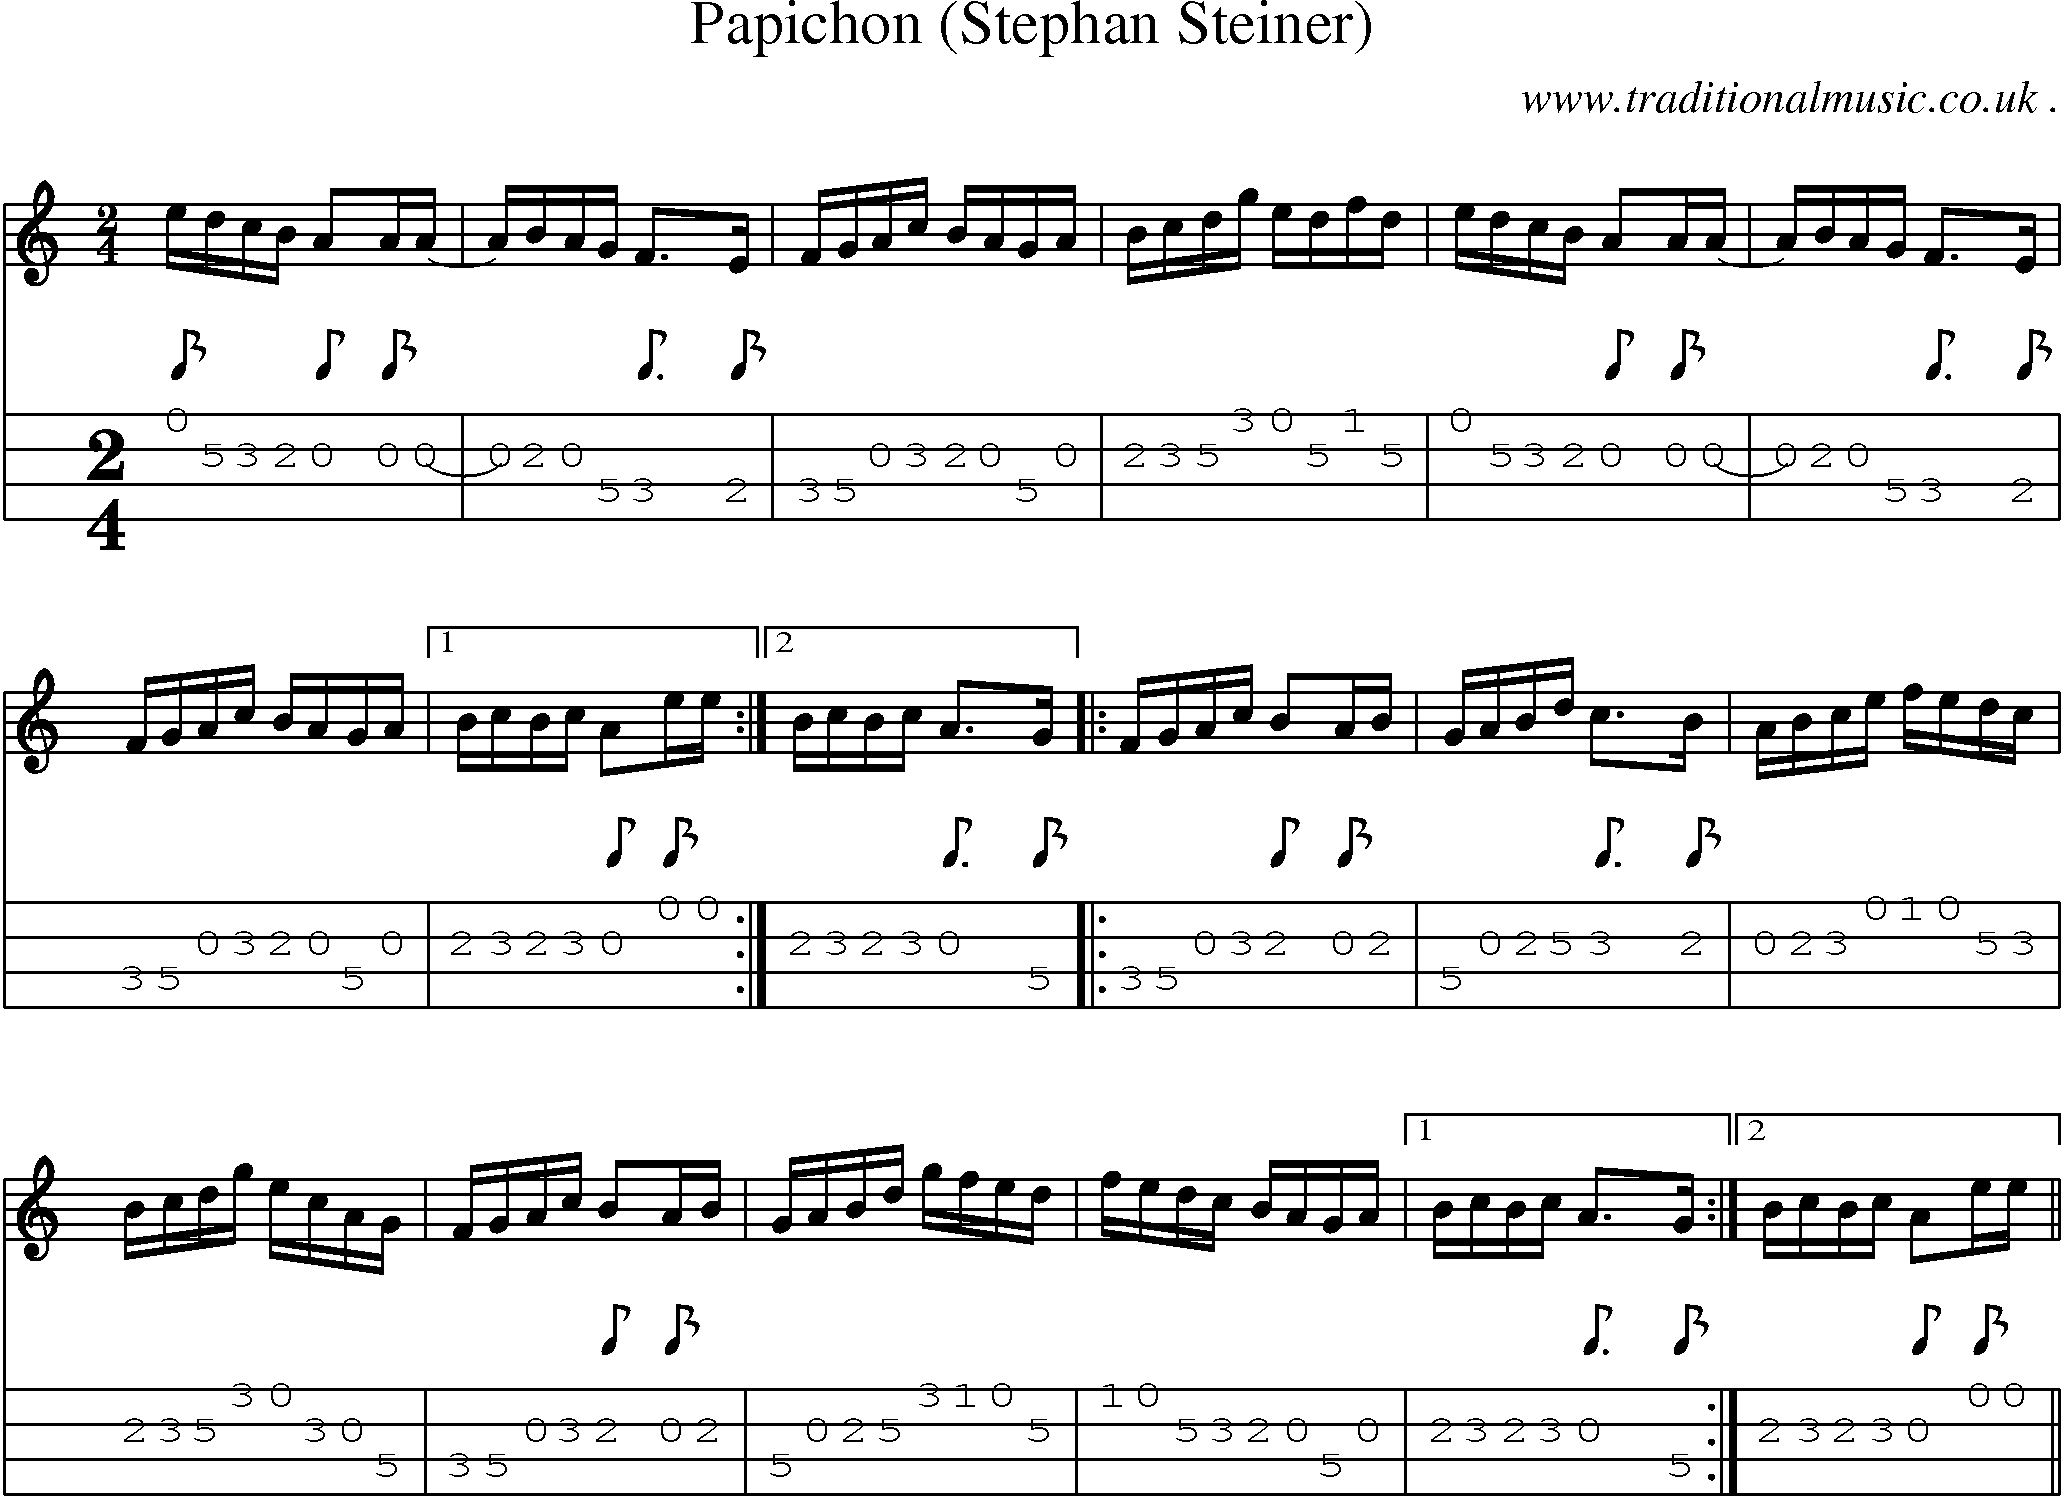 Sheet-Music and Mandolin Tabs for Papichon (stephan Steiner)